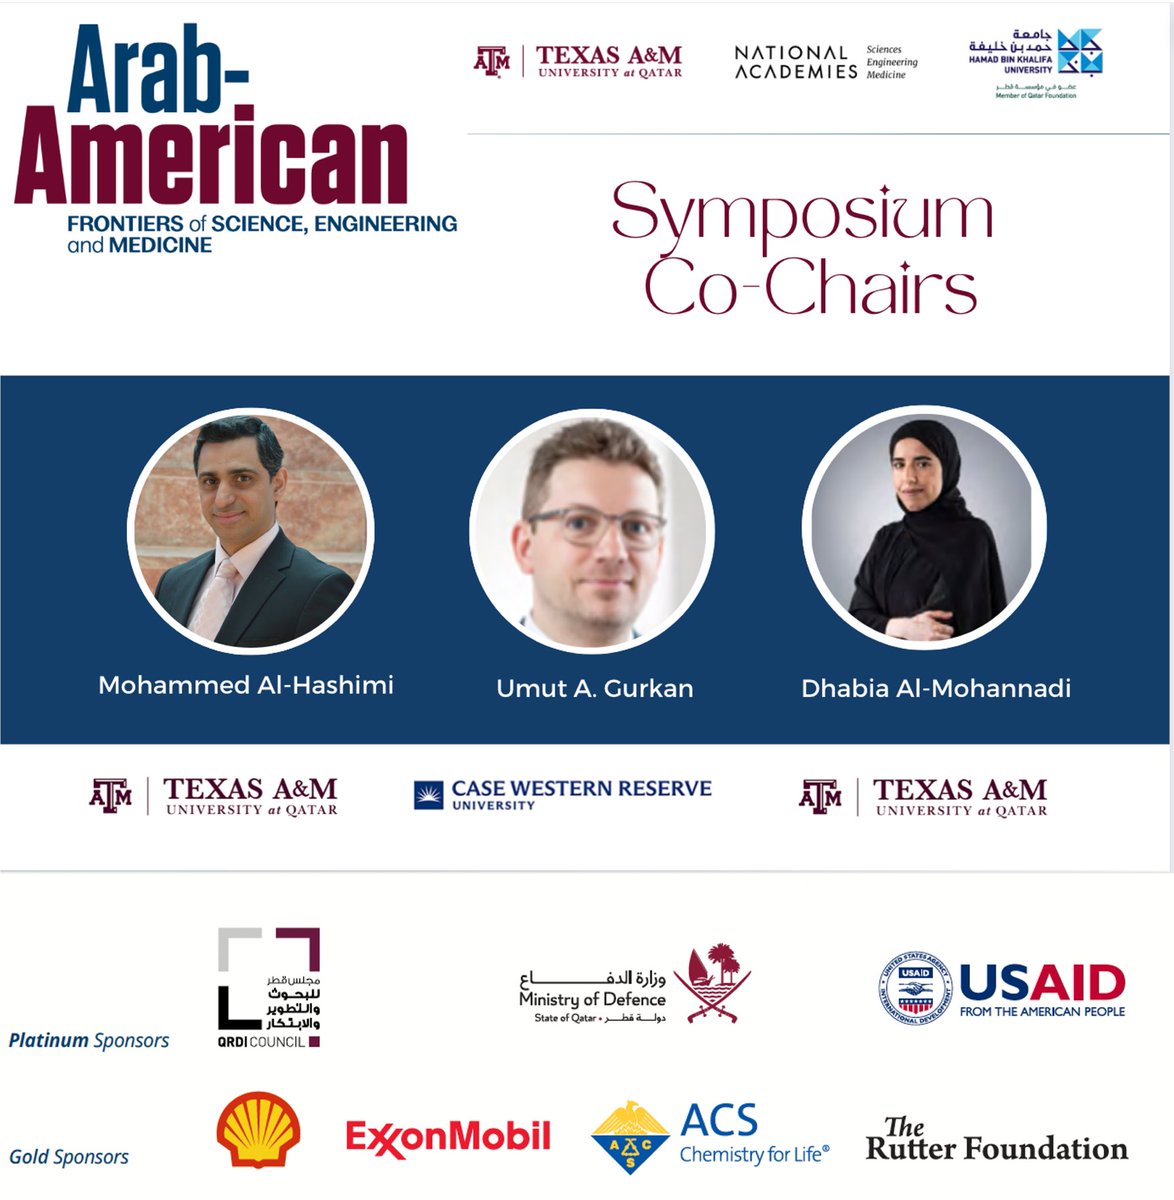 Get ready for the 9th Arab American Symposium in Doha! 🌐 We've got sessions on #Decarbonization, #QuantumComputing, #PrecisionMedicine, #EquityAndInclusion, and more. Stay tuned for inspiring insights! From the #CommitteChairs #ArabAmericanFrontiers2023 #AFF2023 #Innovation